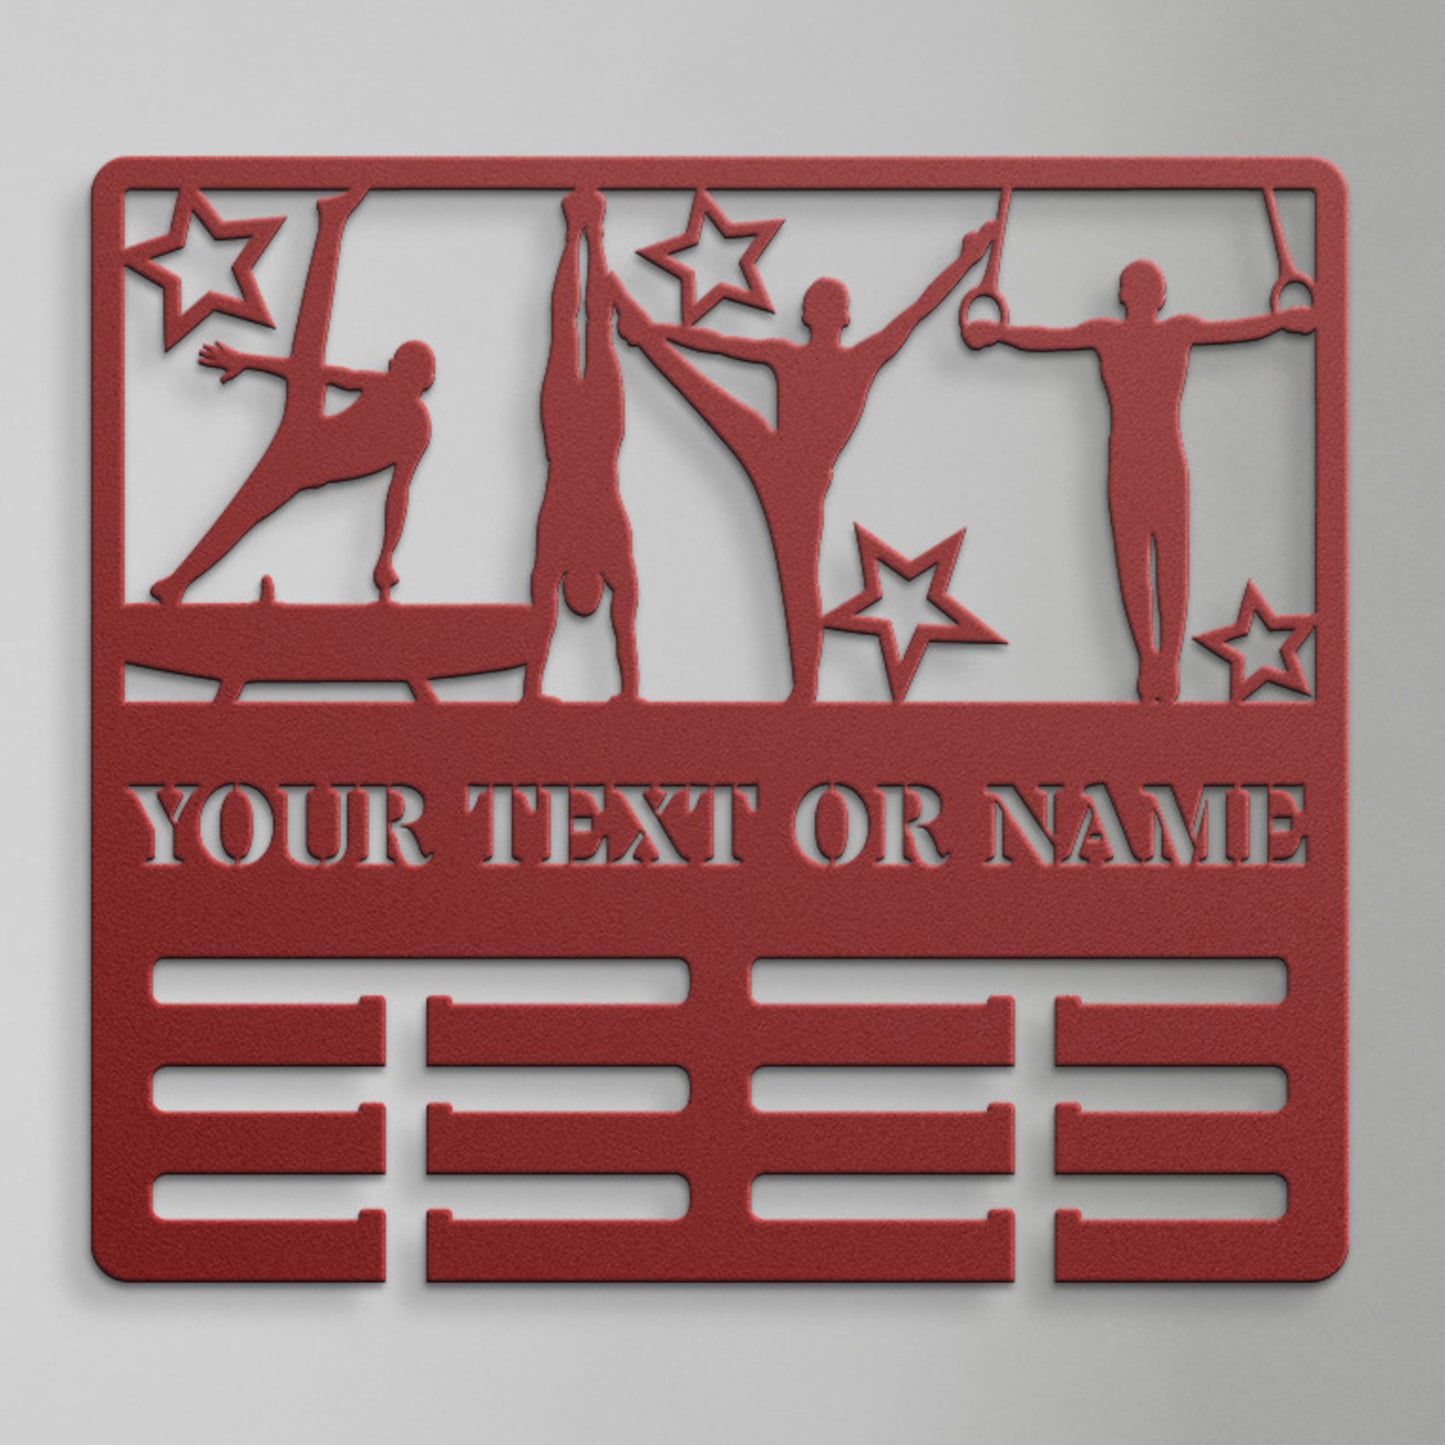 Personalized Male Gymnast Medal Holder Name Metal Sign. Custom Medal Display Gift. Athlete Medals Wall Hanging. Sports Champion Decor Gift